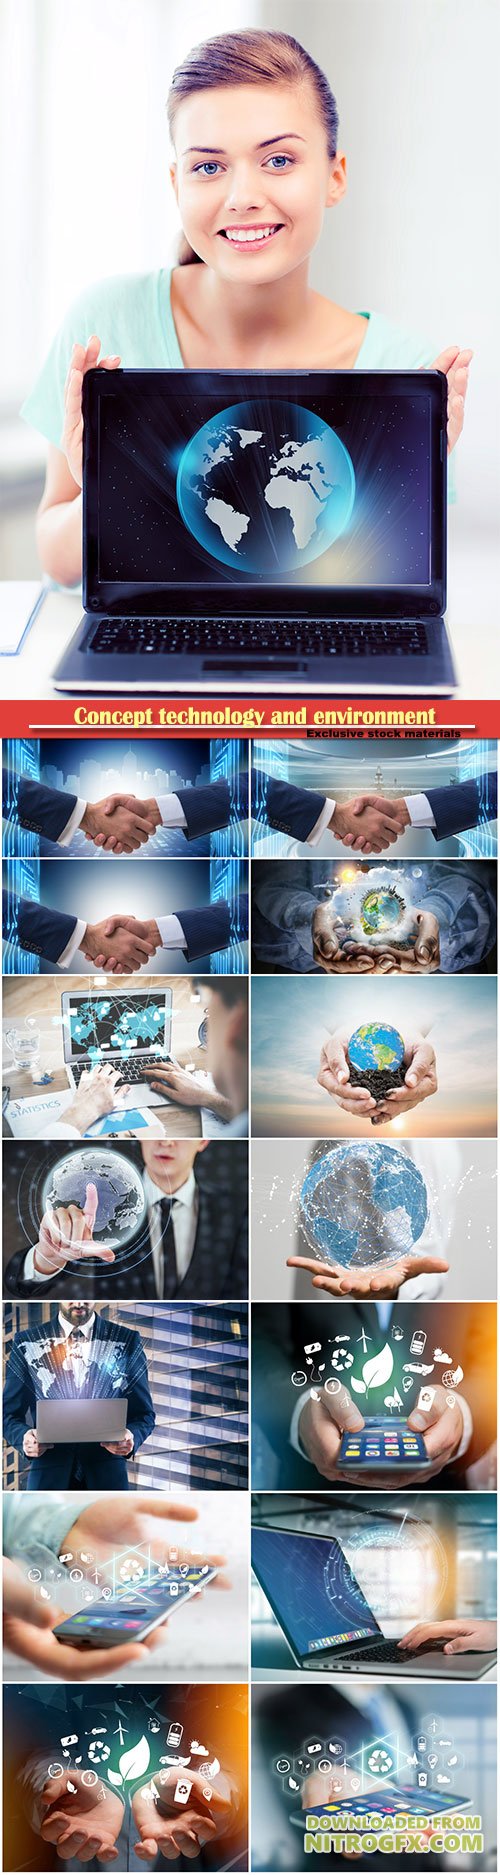 Concept technology and environment, network concept